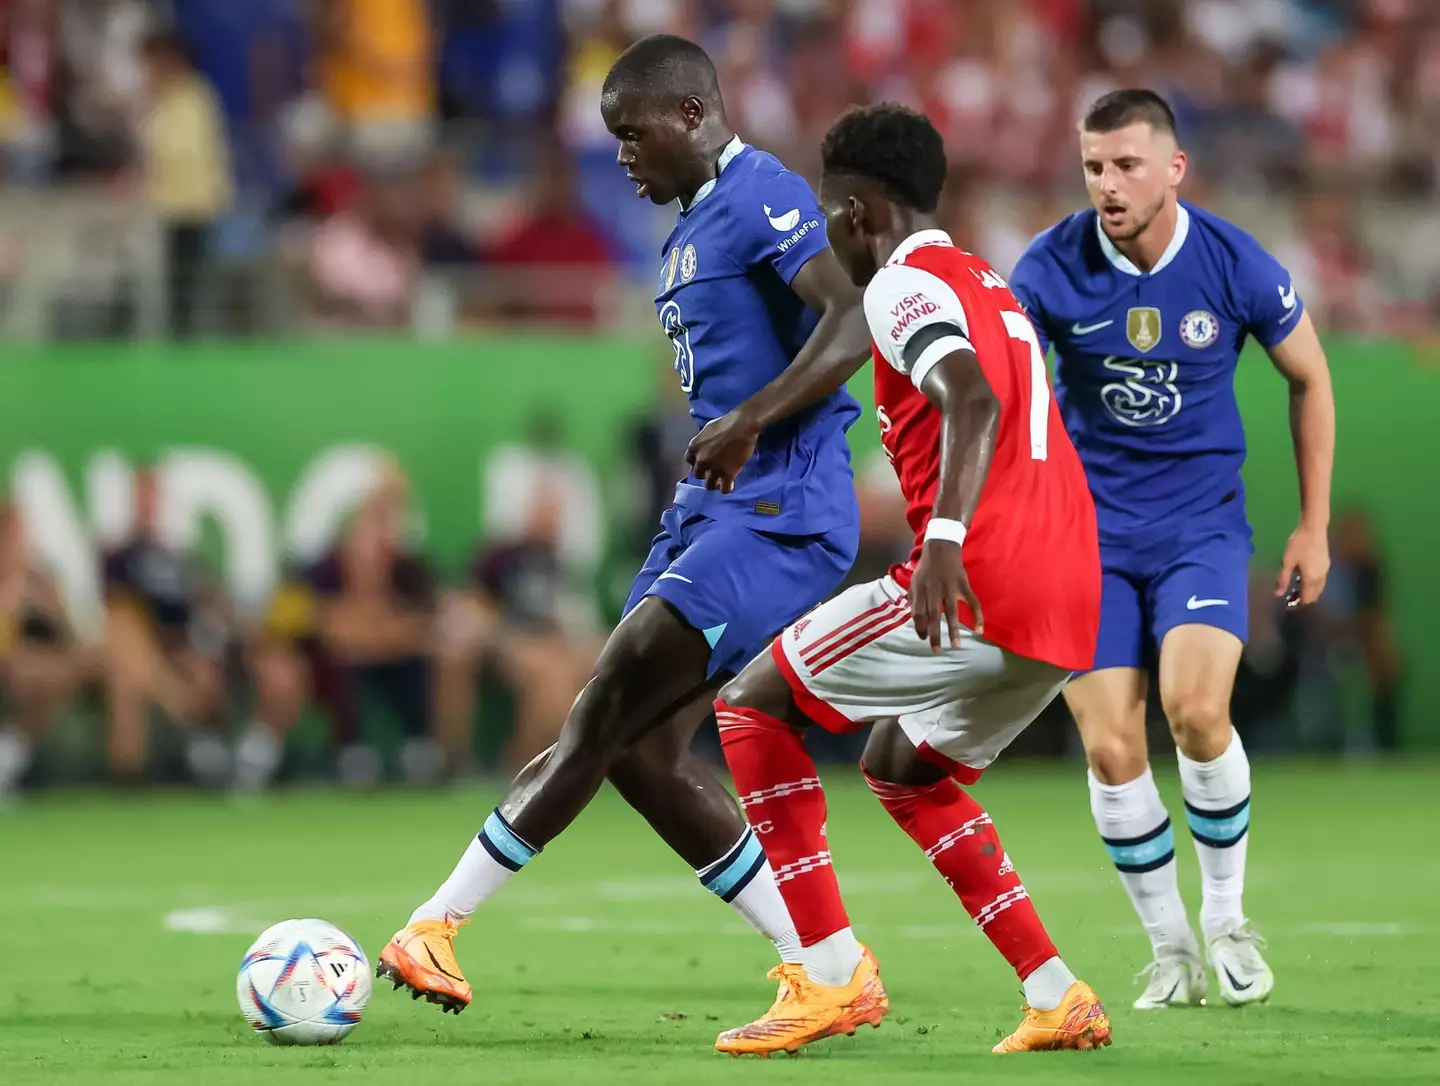 Chelsea defender Malang Sarr (31) competes for the ball against Arsenal midfielder Bukayo Saka (7) during the Florida Cup Series Arsenal vs Chelsea FC. (Alamy)